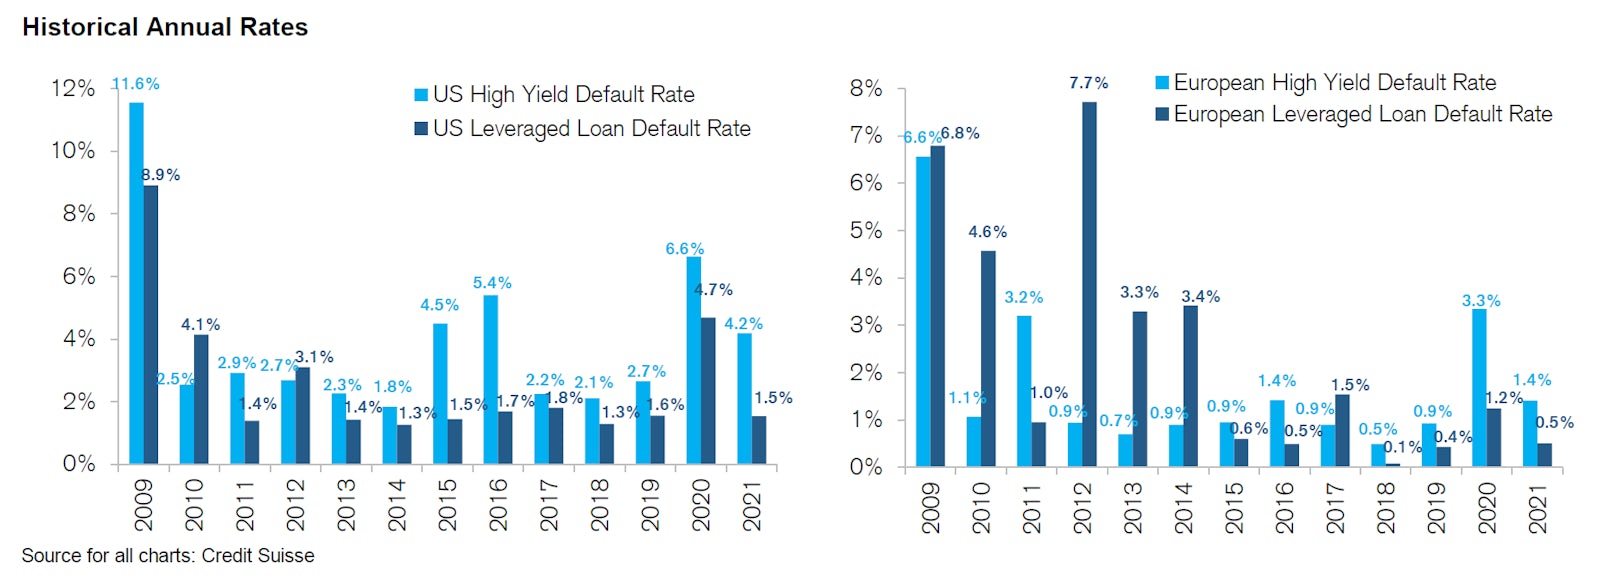 Historical Default Rates For US and European High Yield And Leveraged Loans | Source: Credit Suisse